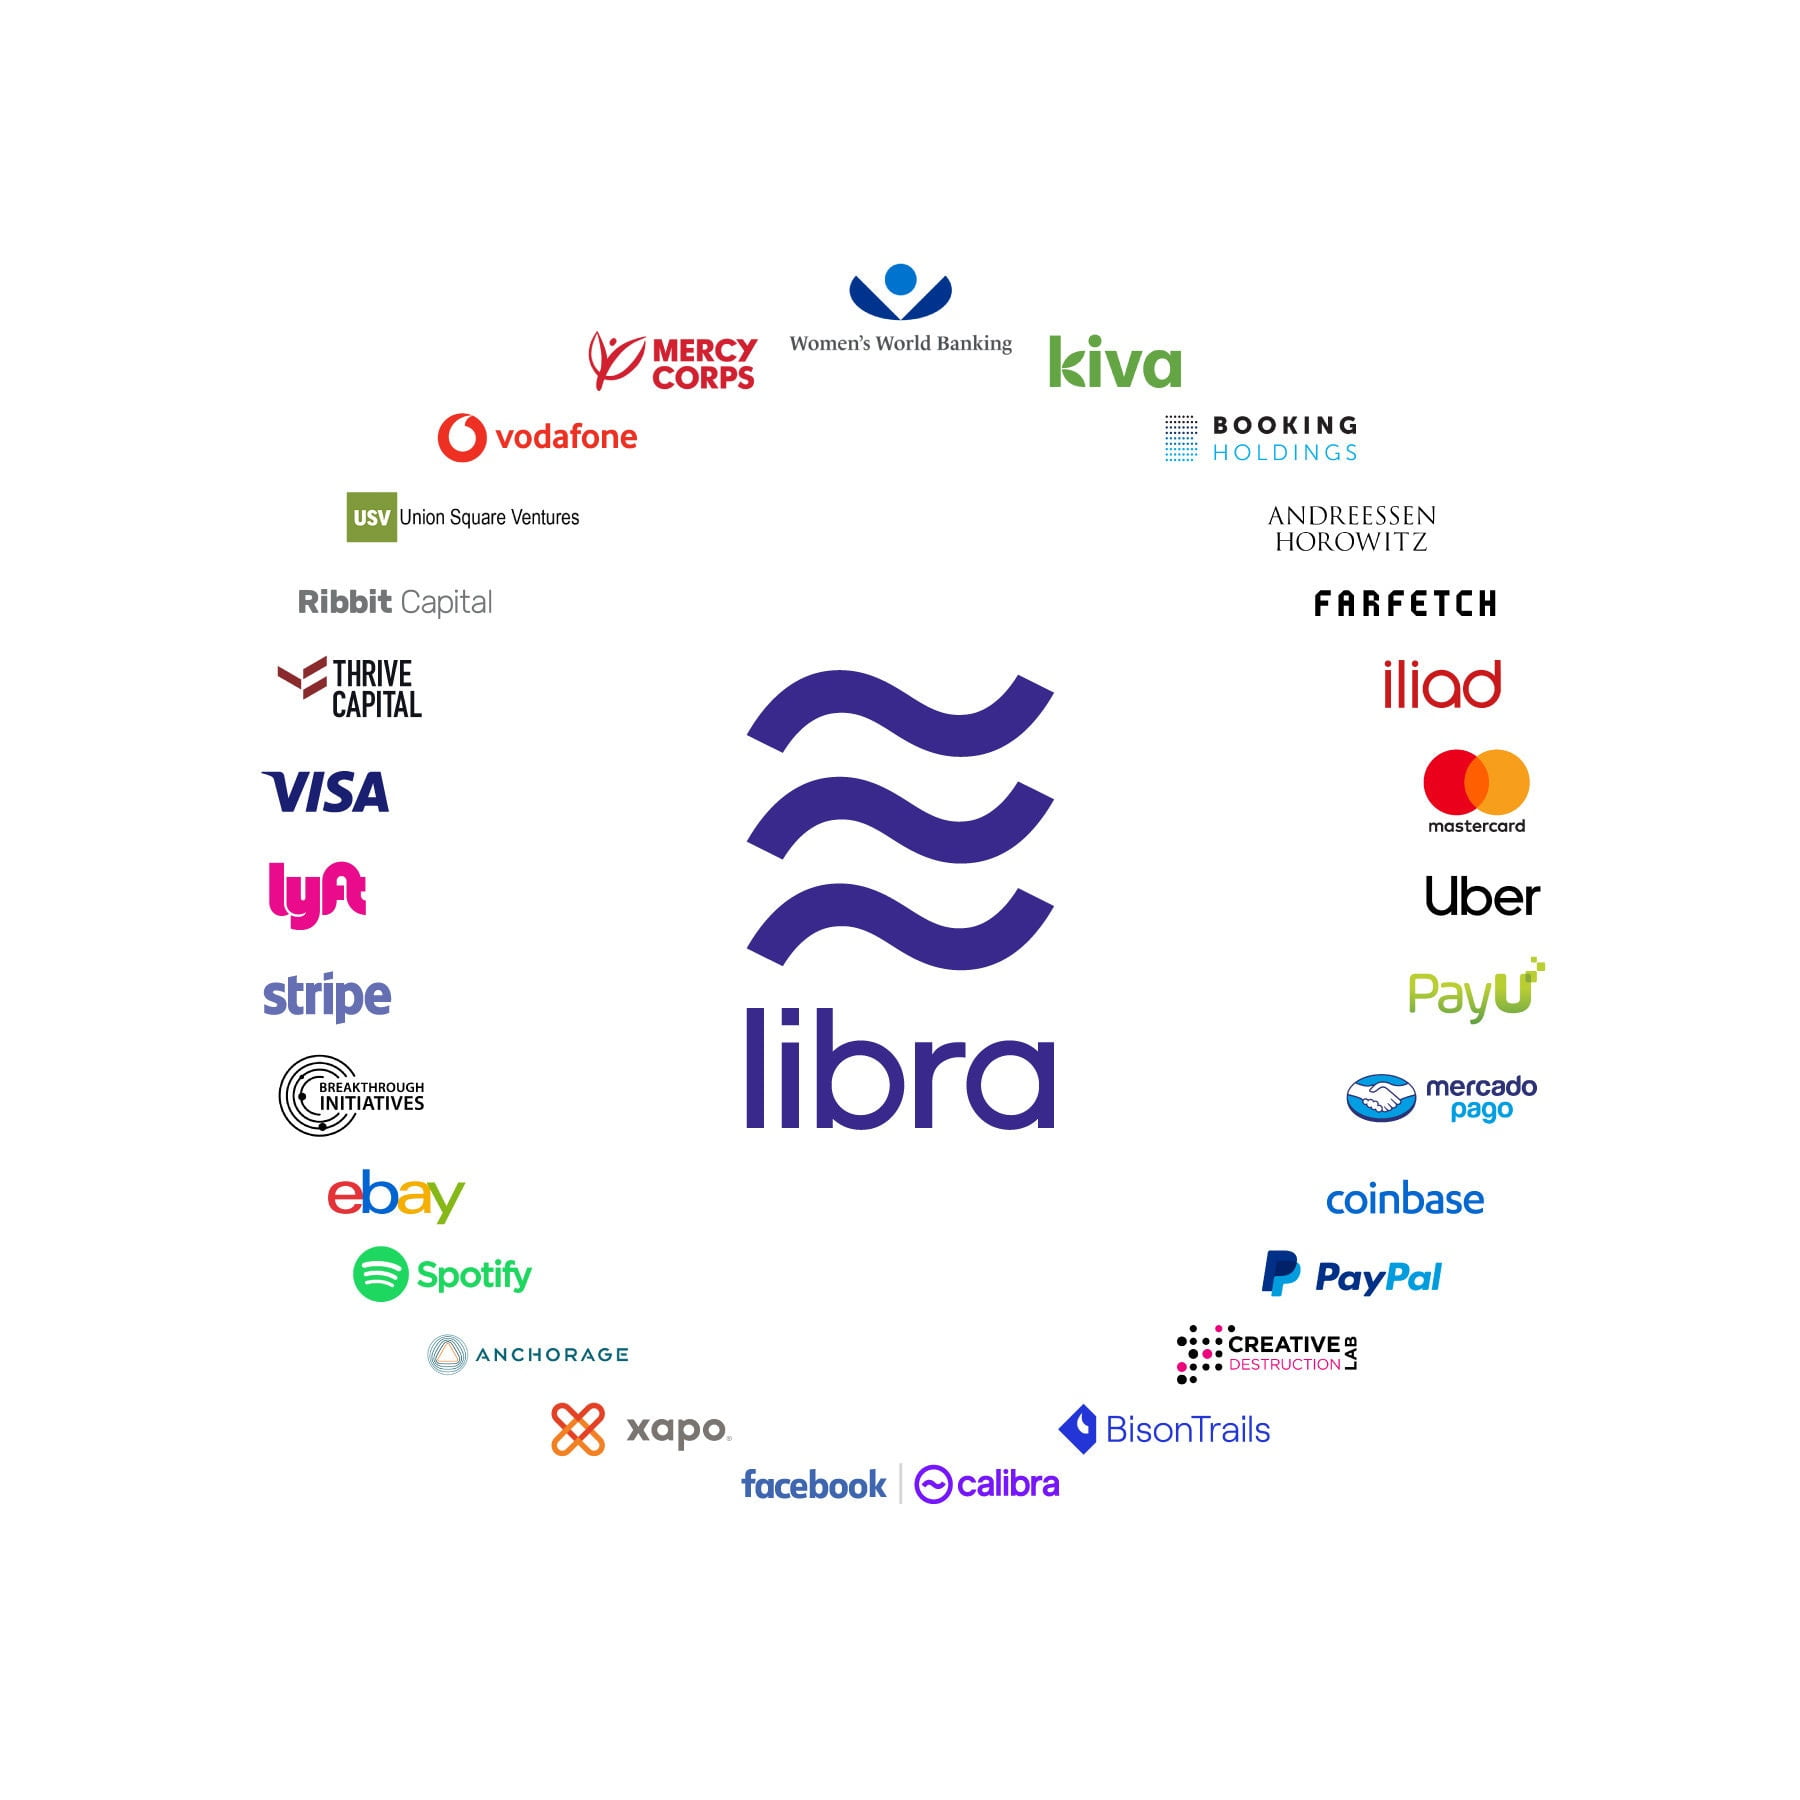 This image shows the initial 29 Libra partners, including Visa and Anchorage, a Crypto Startup